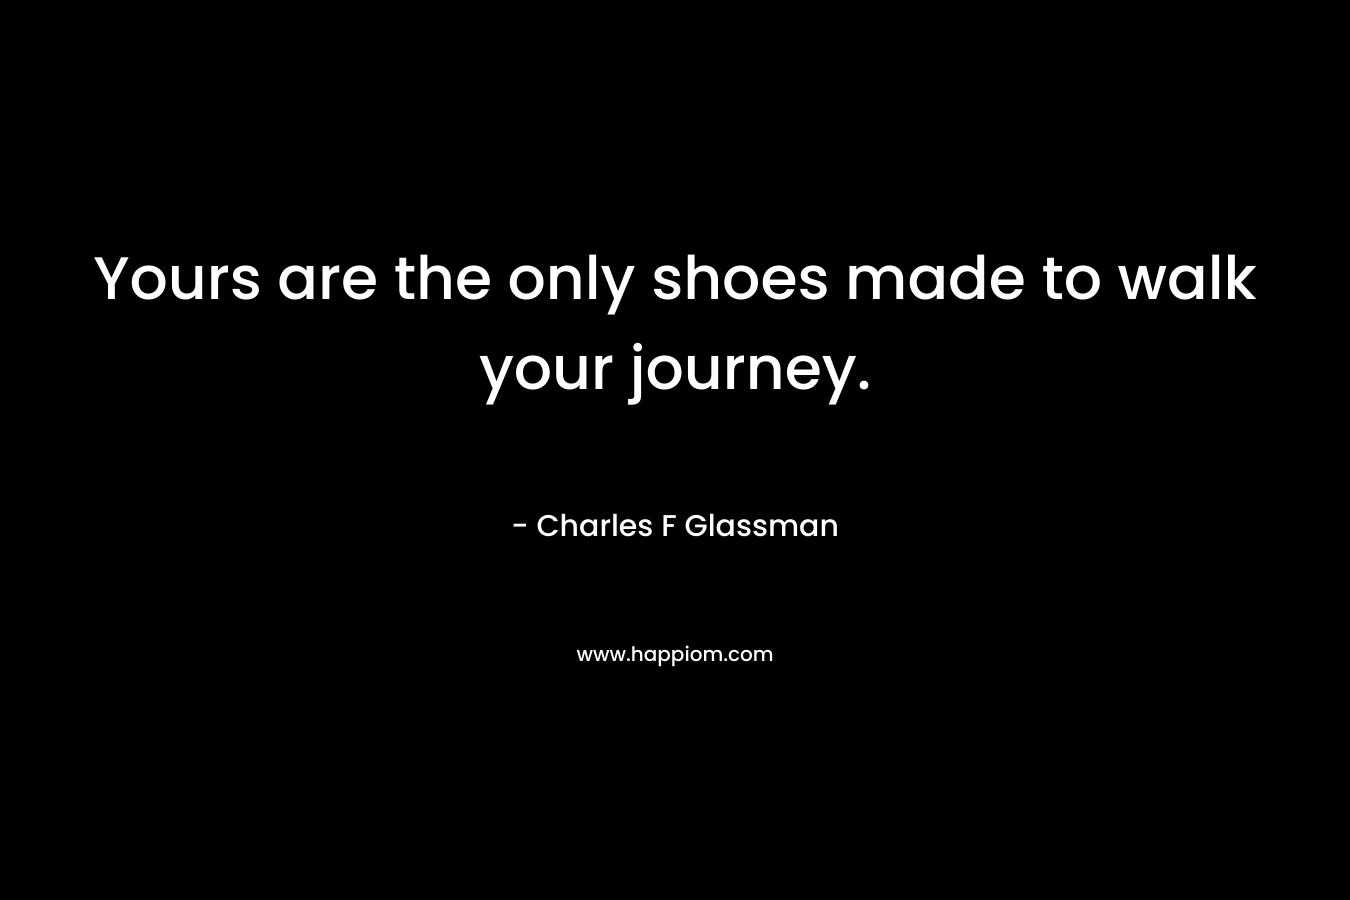 Yours are the only shoes made to walk your journey.